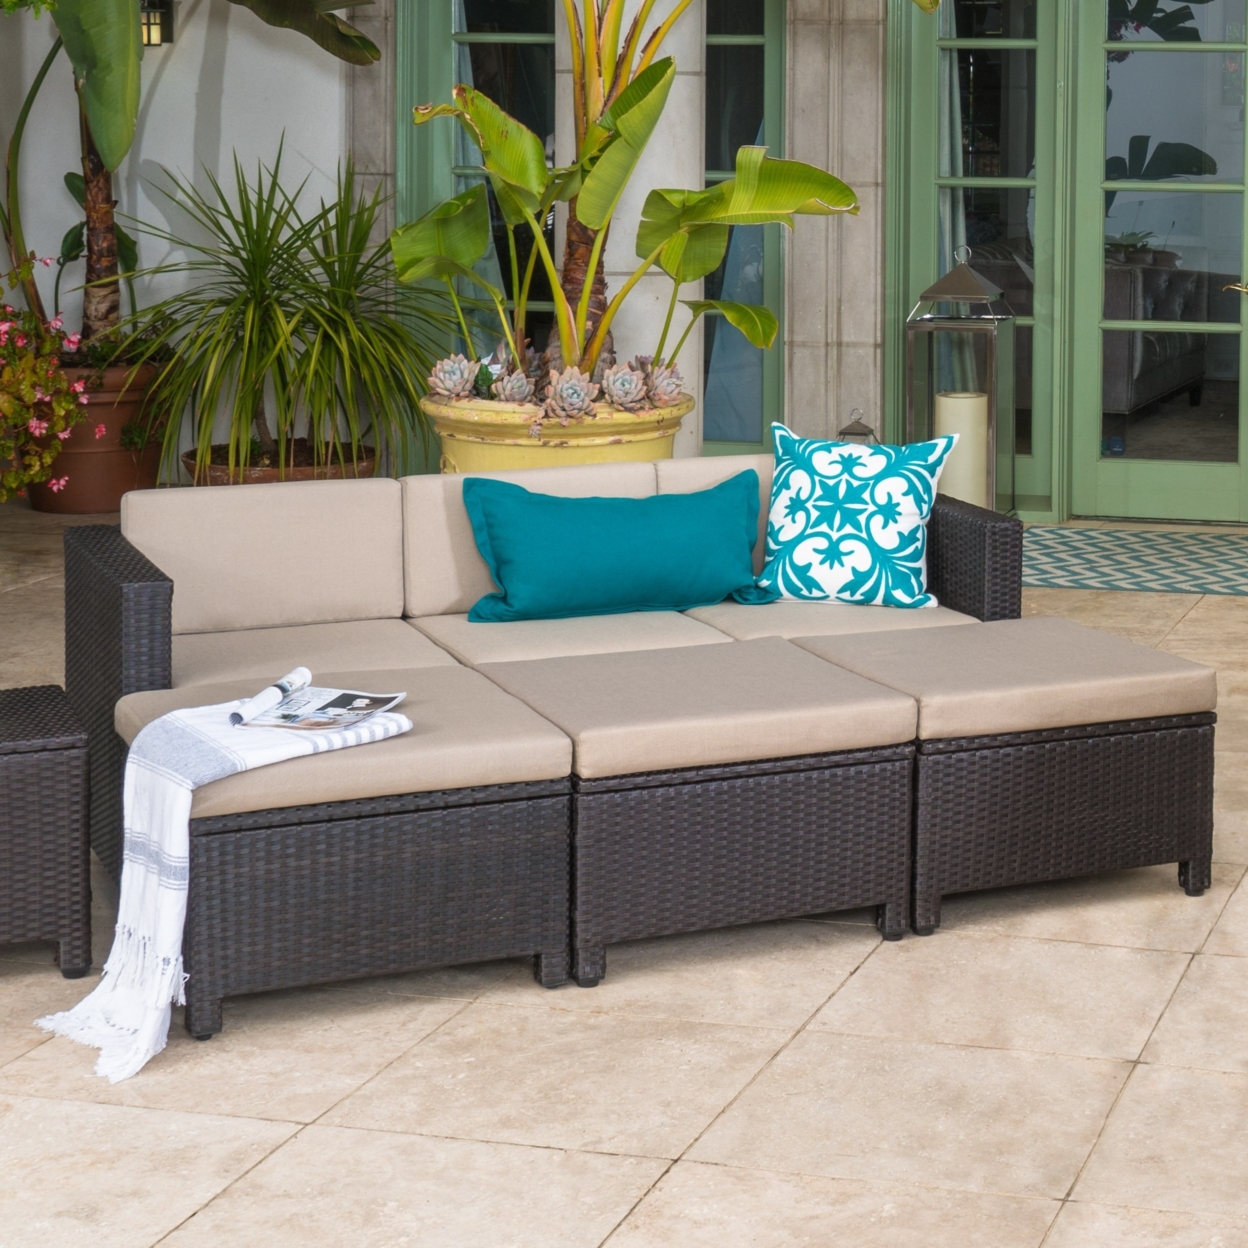 Pueblo Outdoor Wicker Daybed Set With Water Resistant Cushions - Mixed Black/Dark Gray